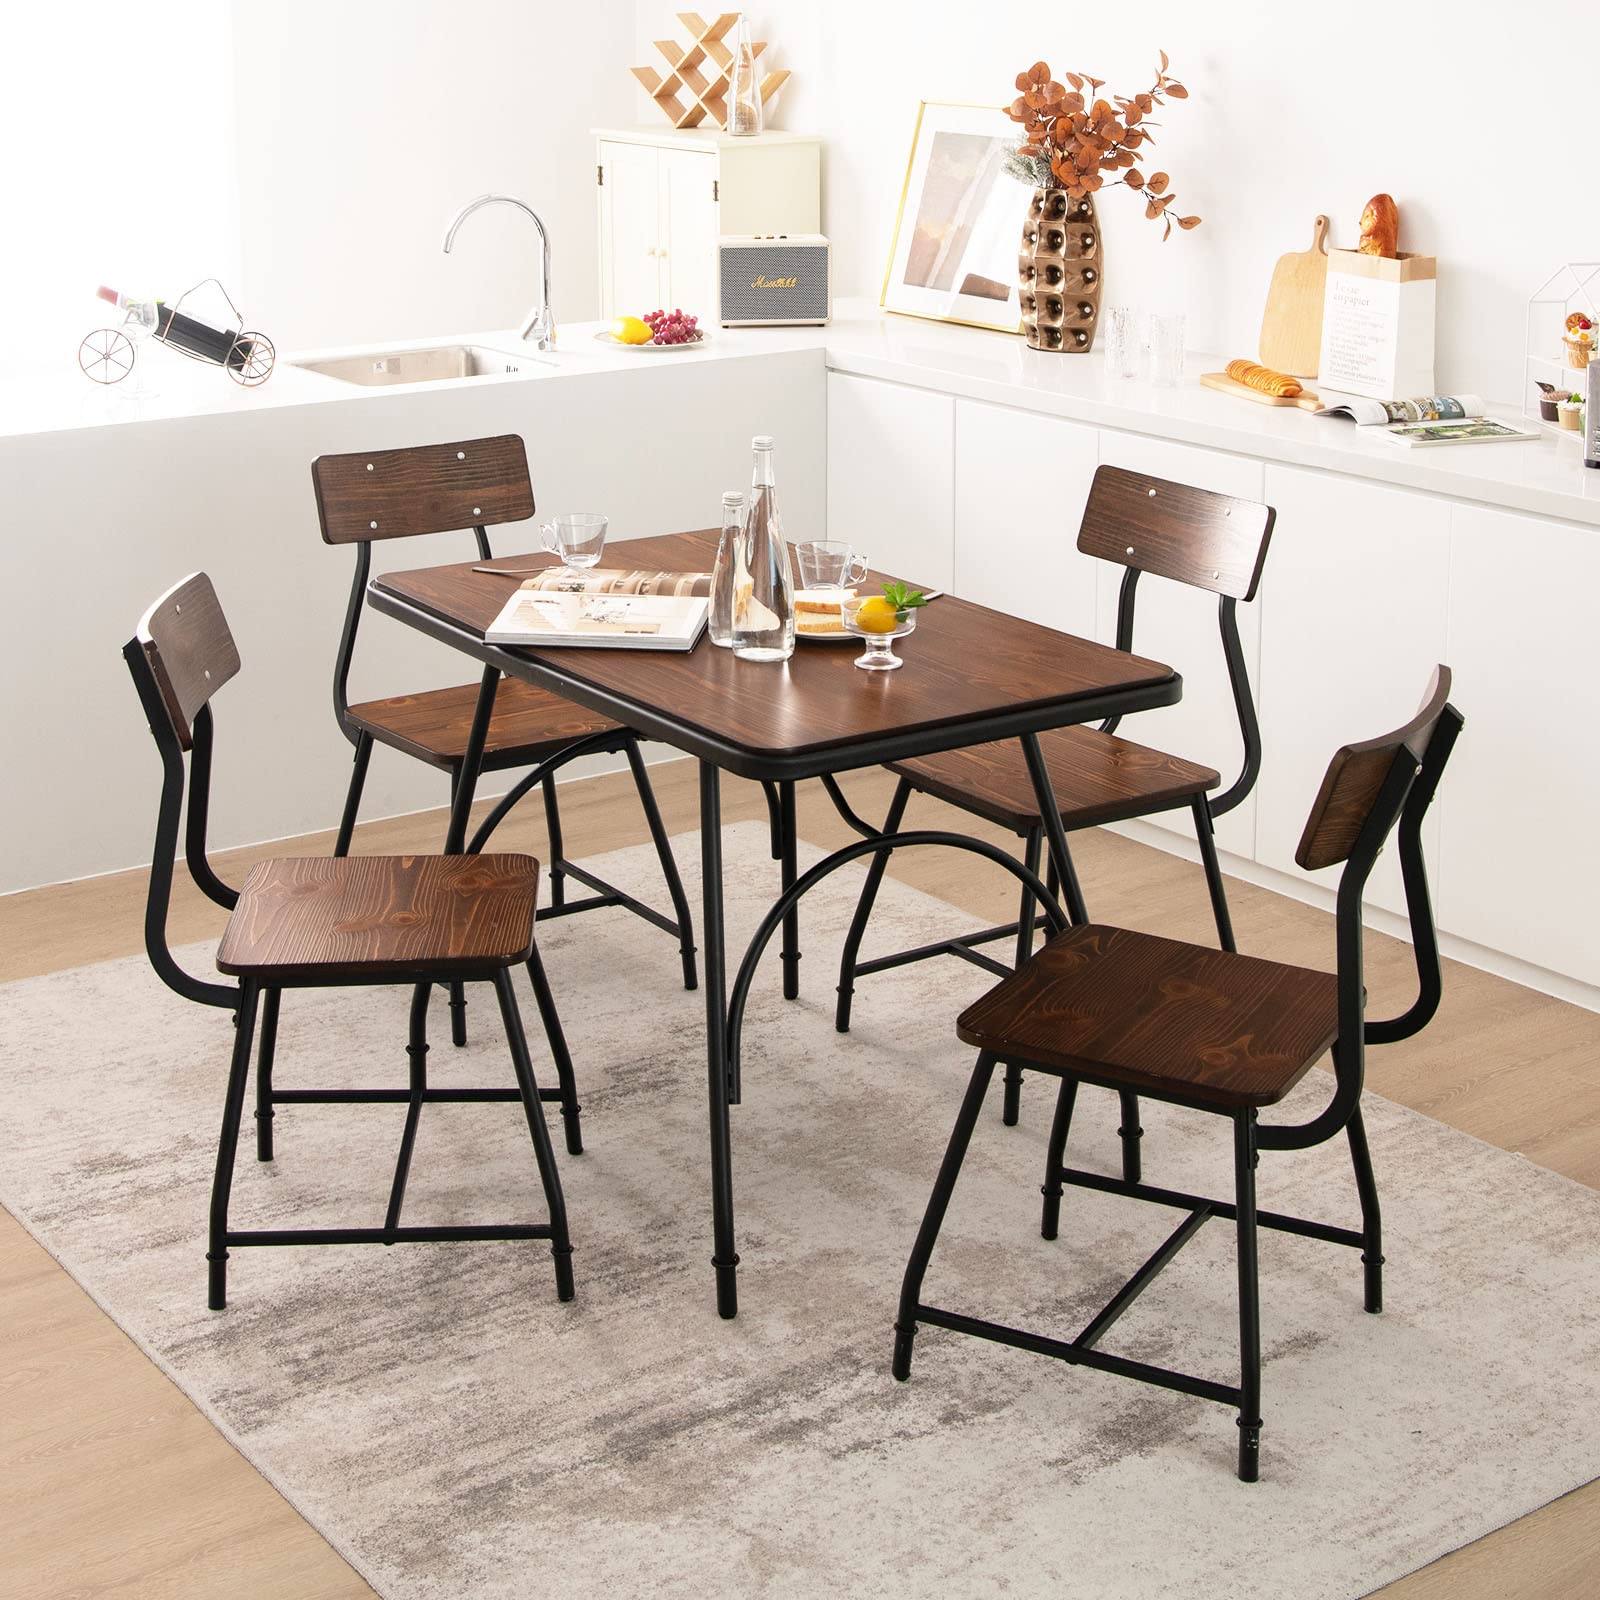 Giantex 5 Piece Dining Table Set, Rectangular Kitchen Table & 4 Chairs for 4